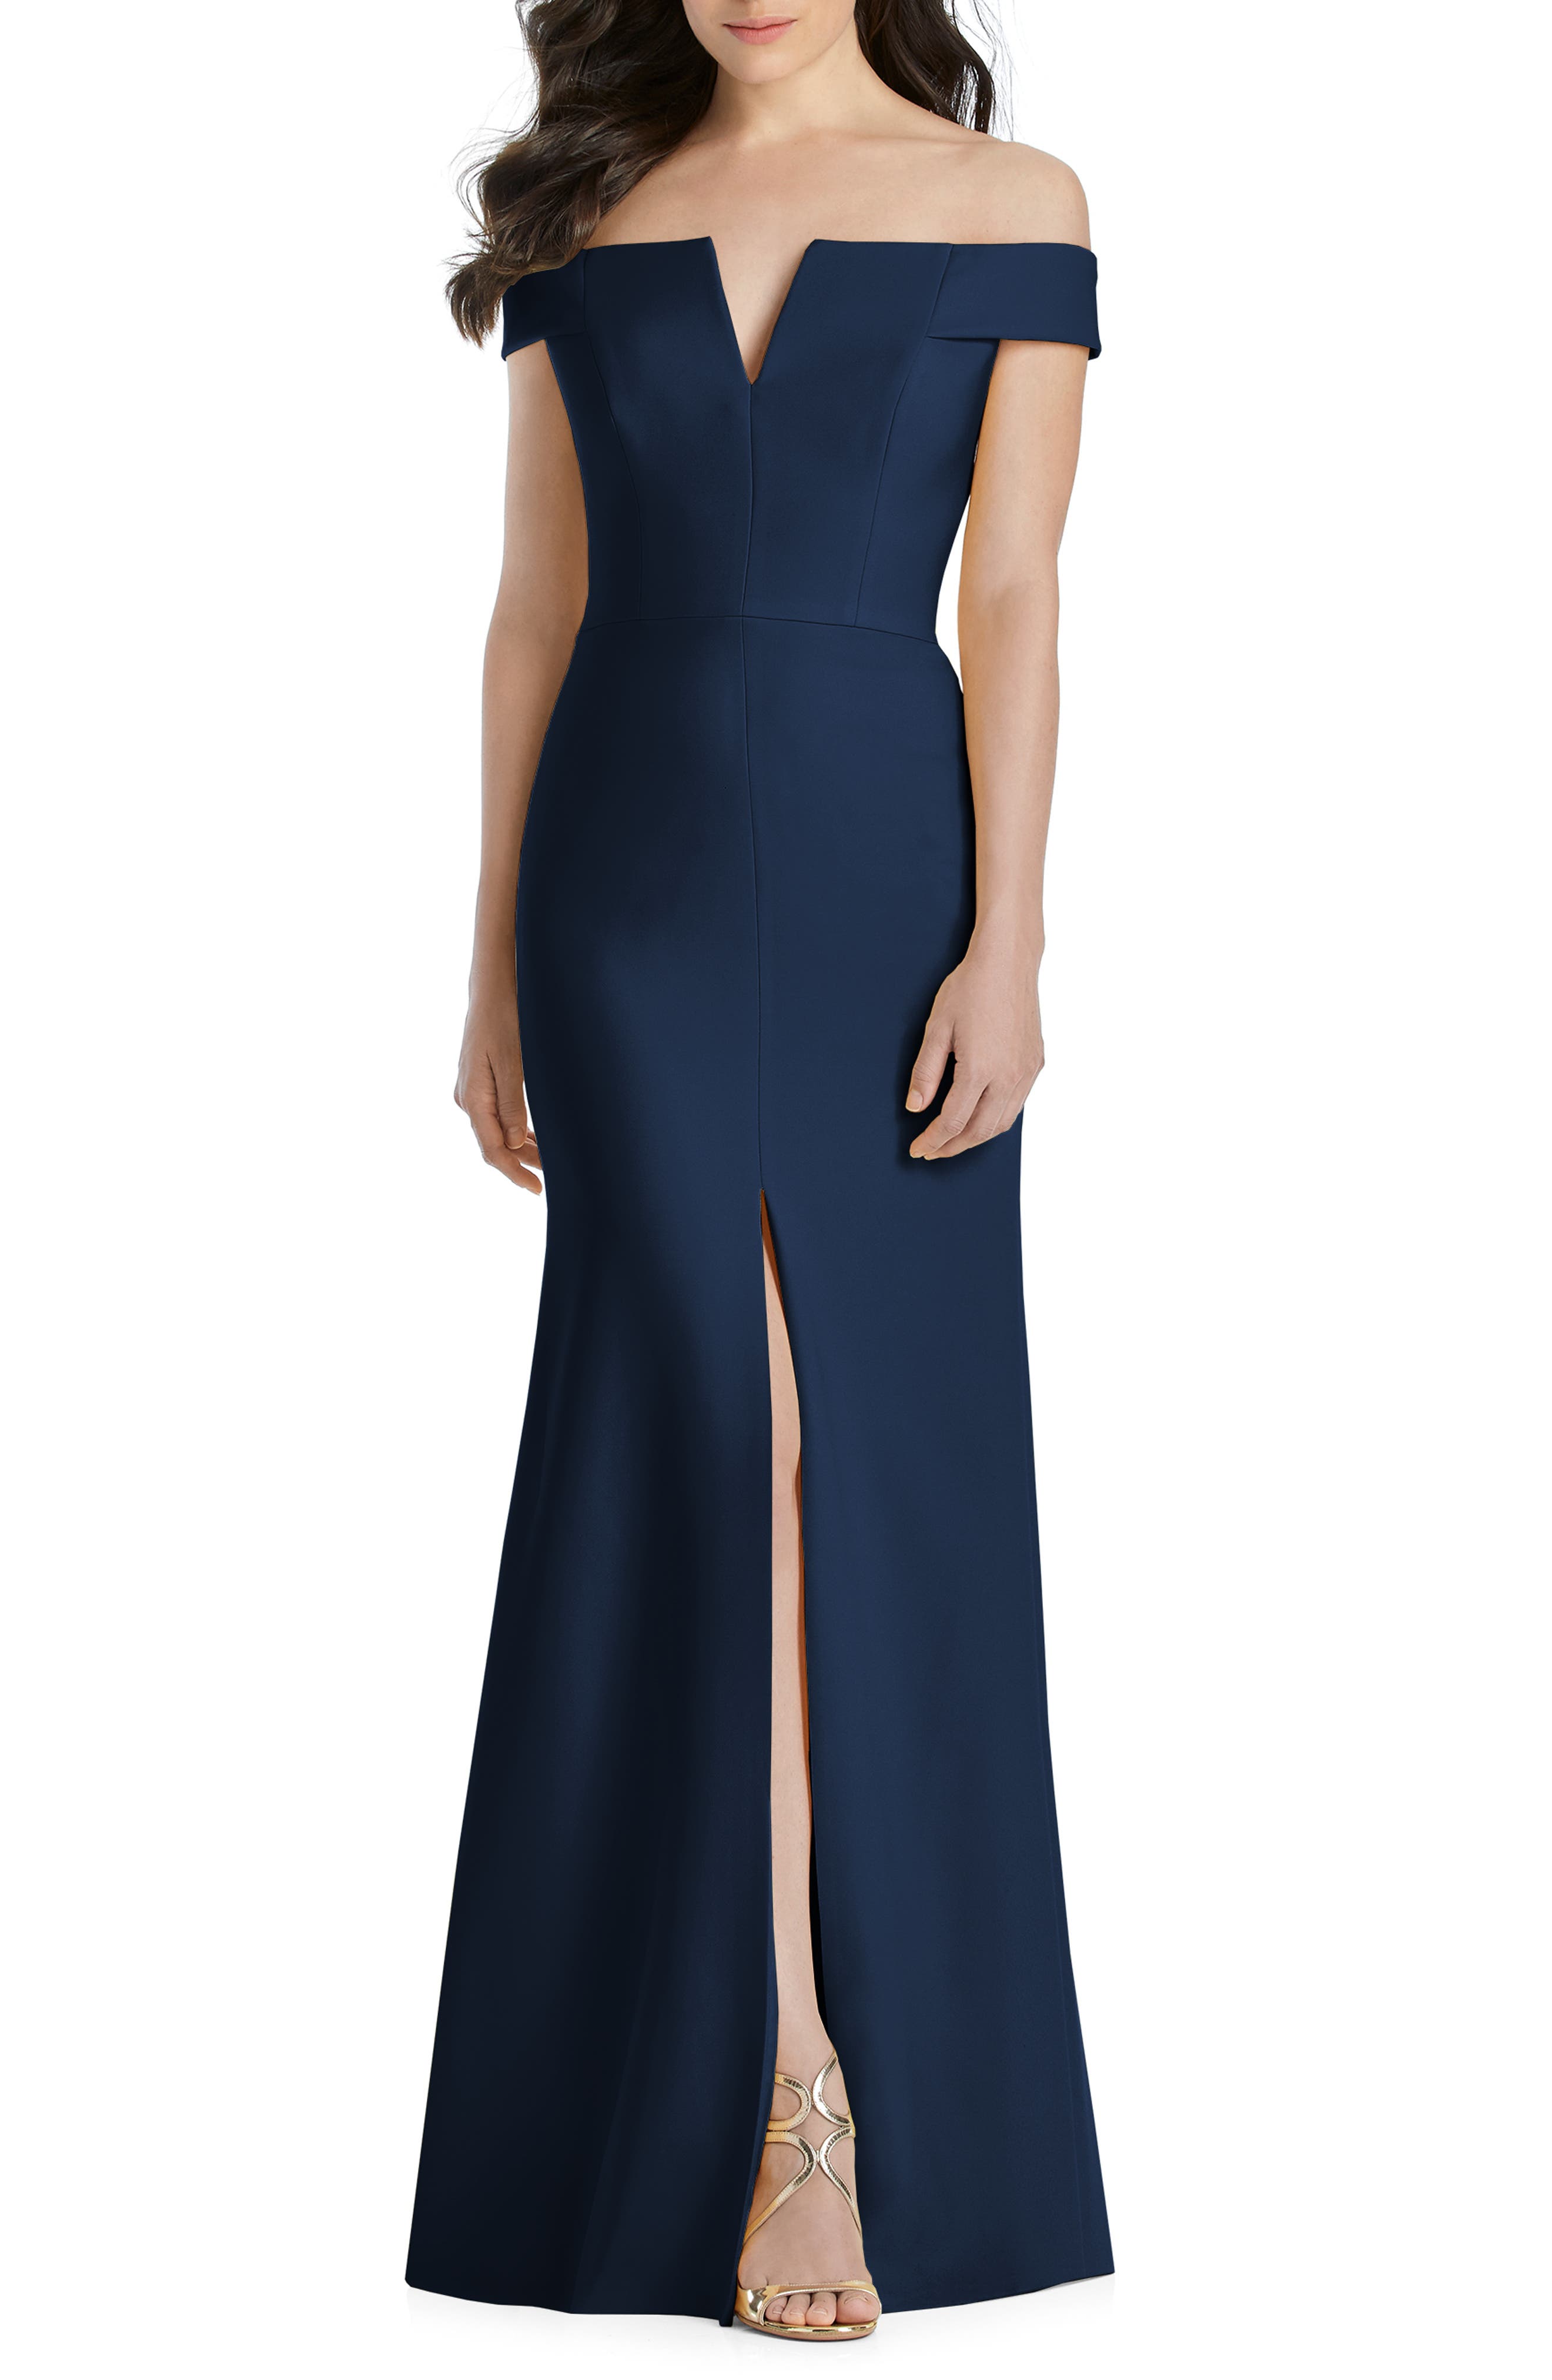 navy blue and gold gown